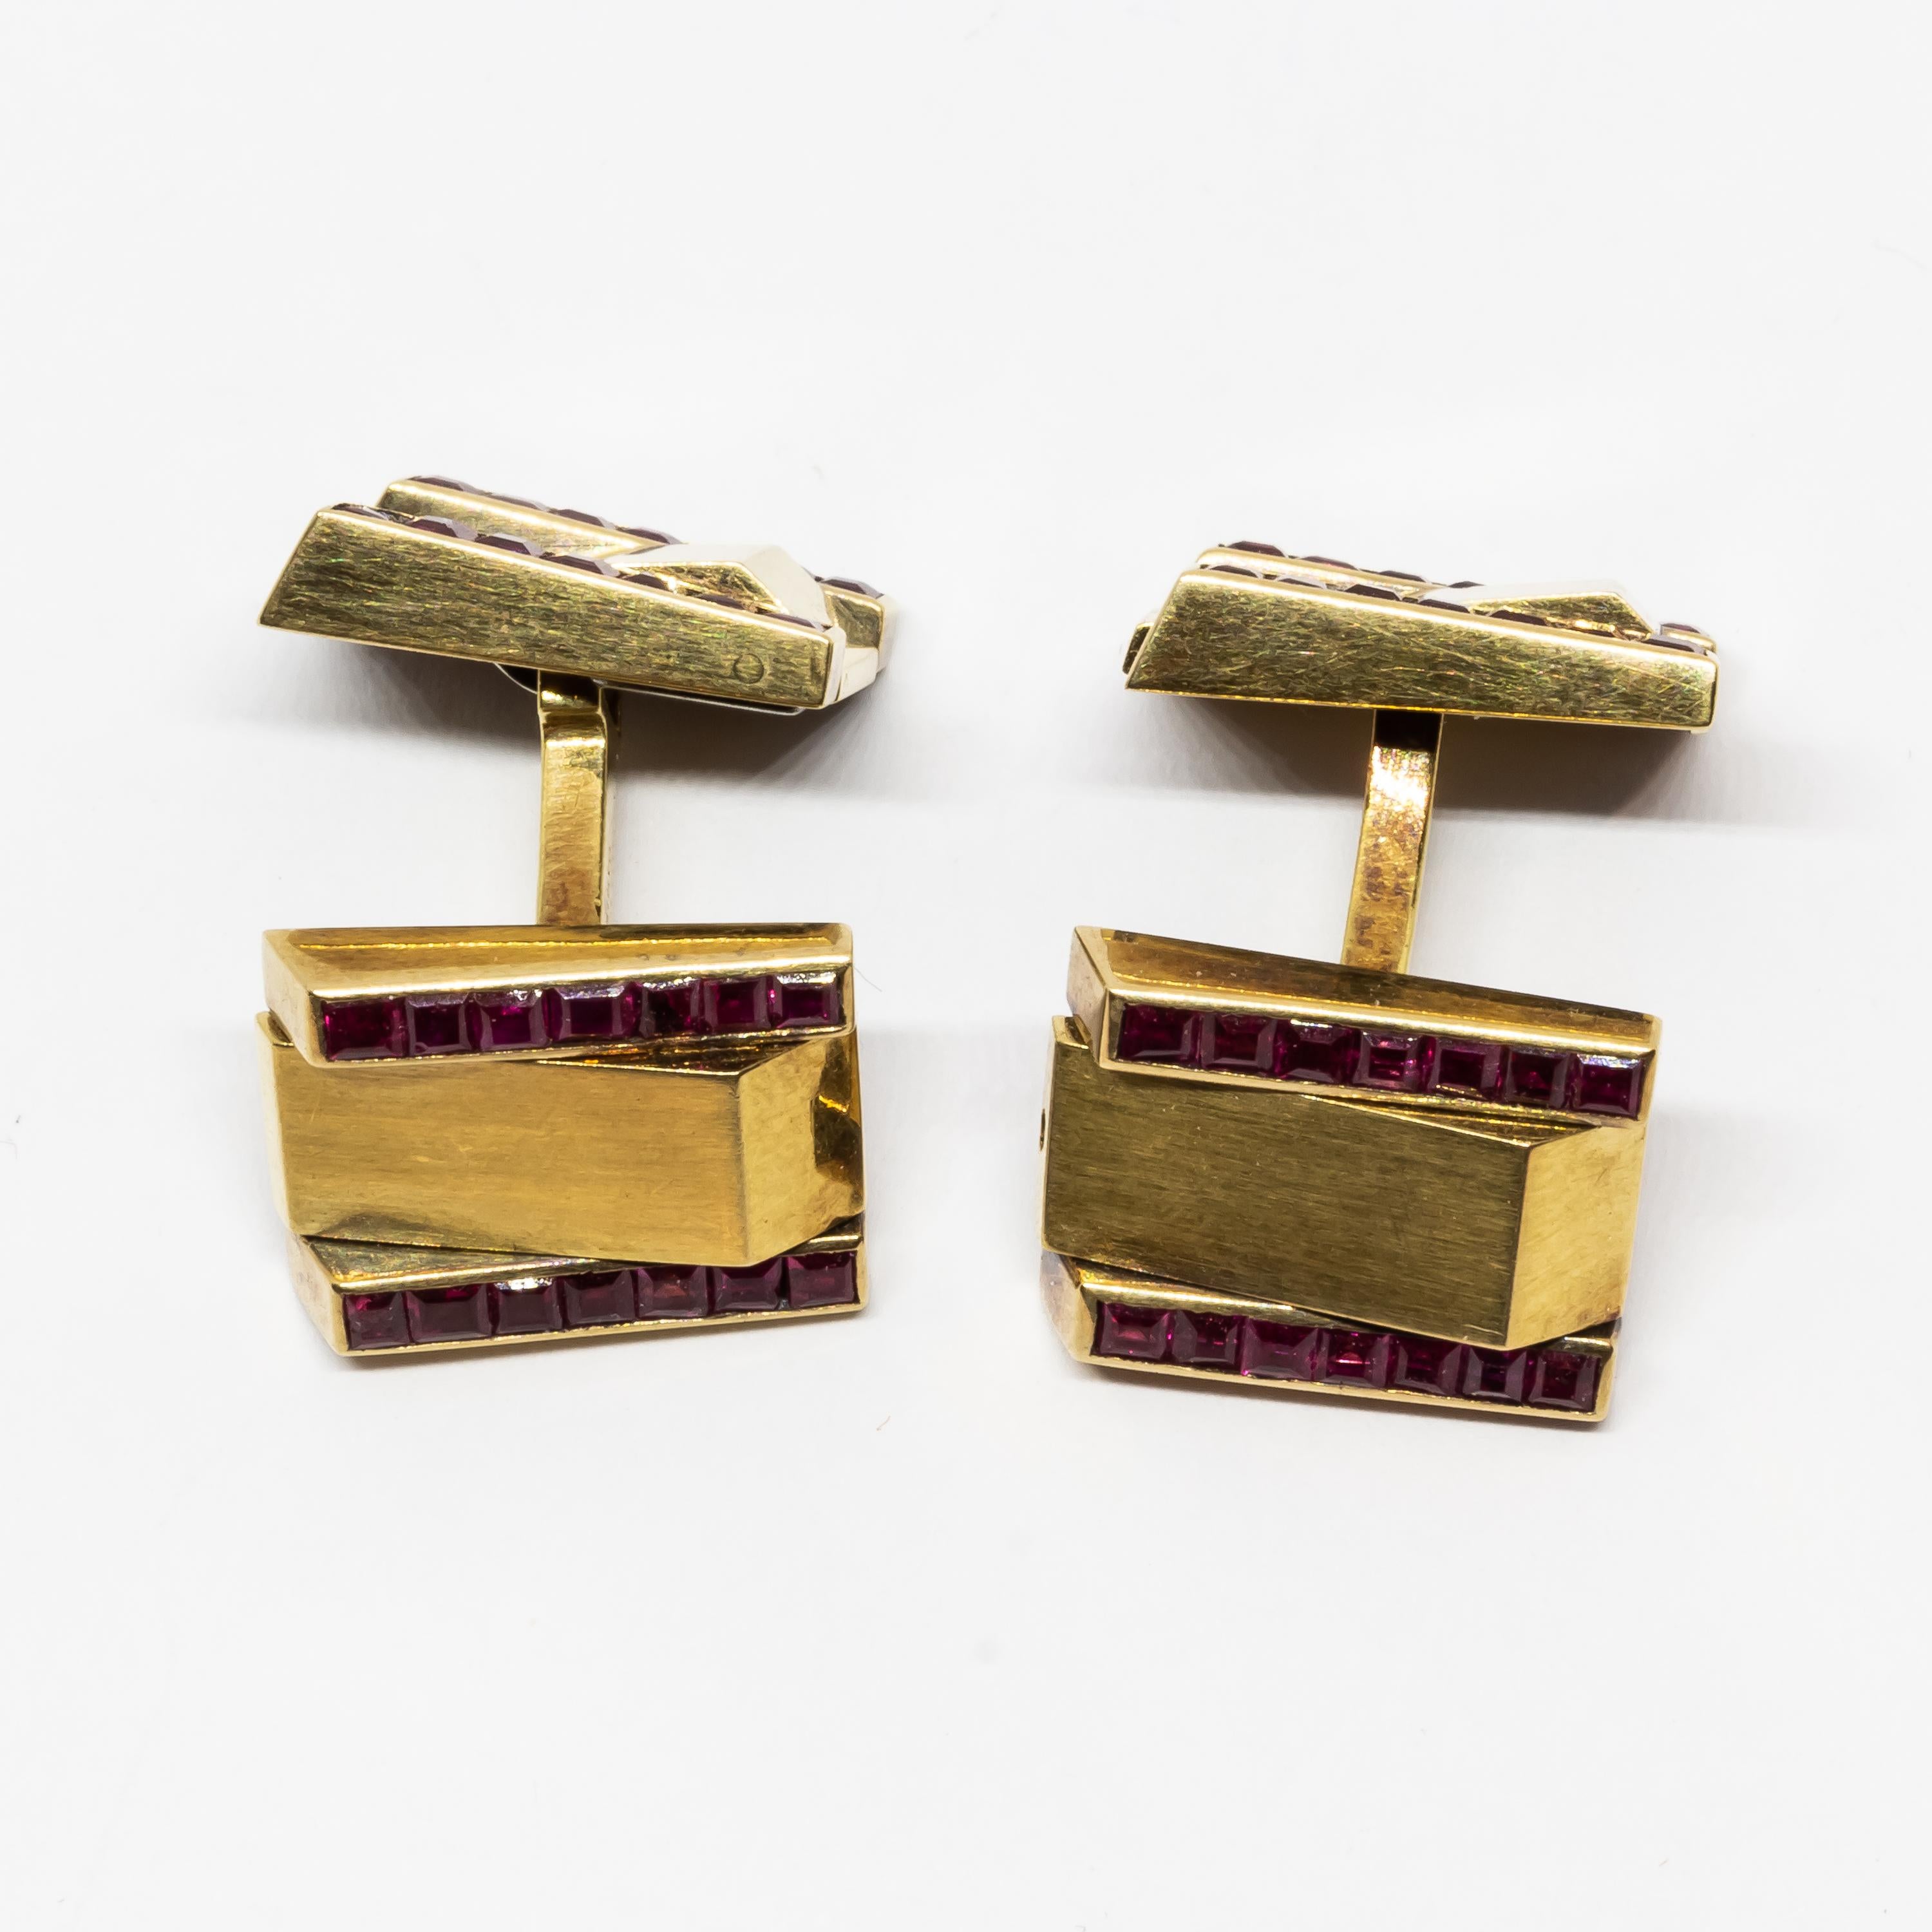 Square Cut Van Cleef & Arpels Ruby and Gold Cufflinks, circa 1940